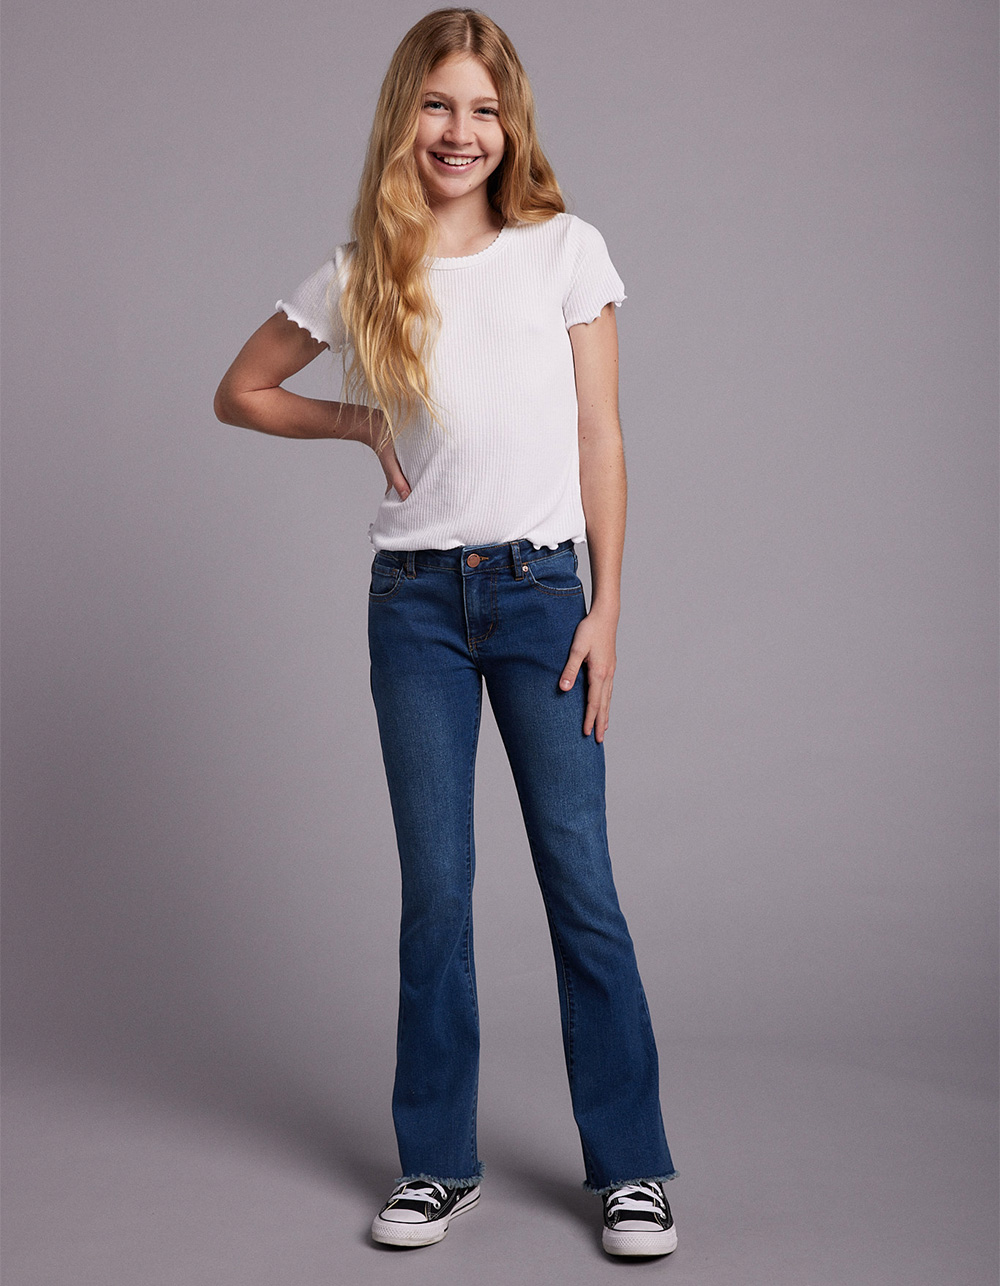 Girls Midwash Flare Jeans, Girls Jeans